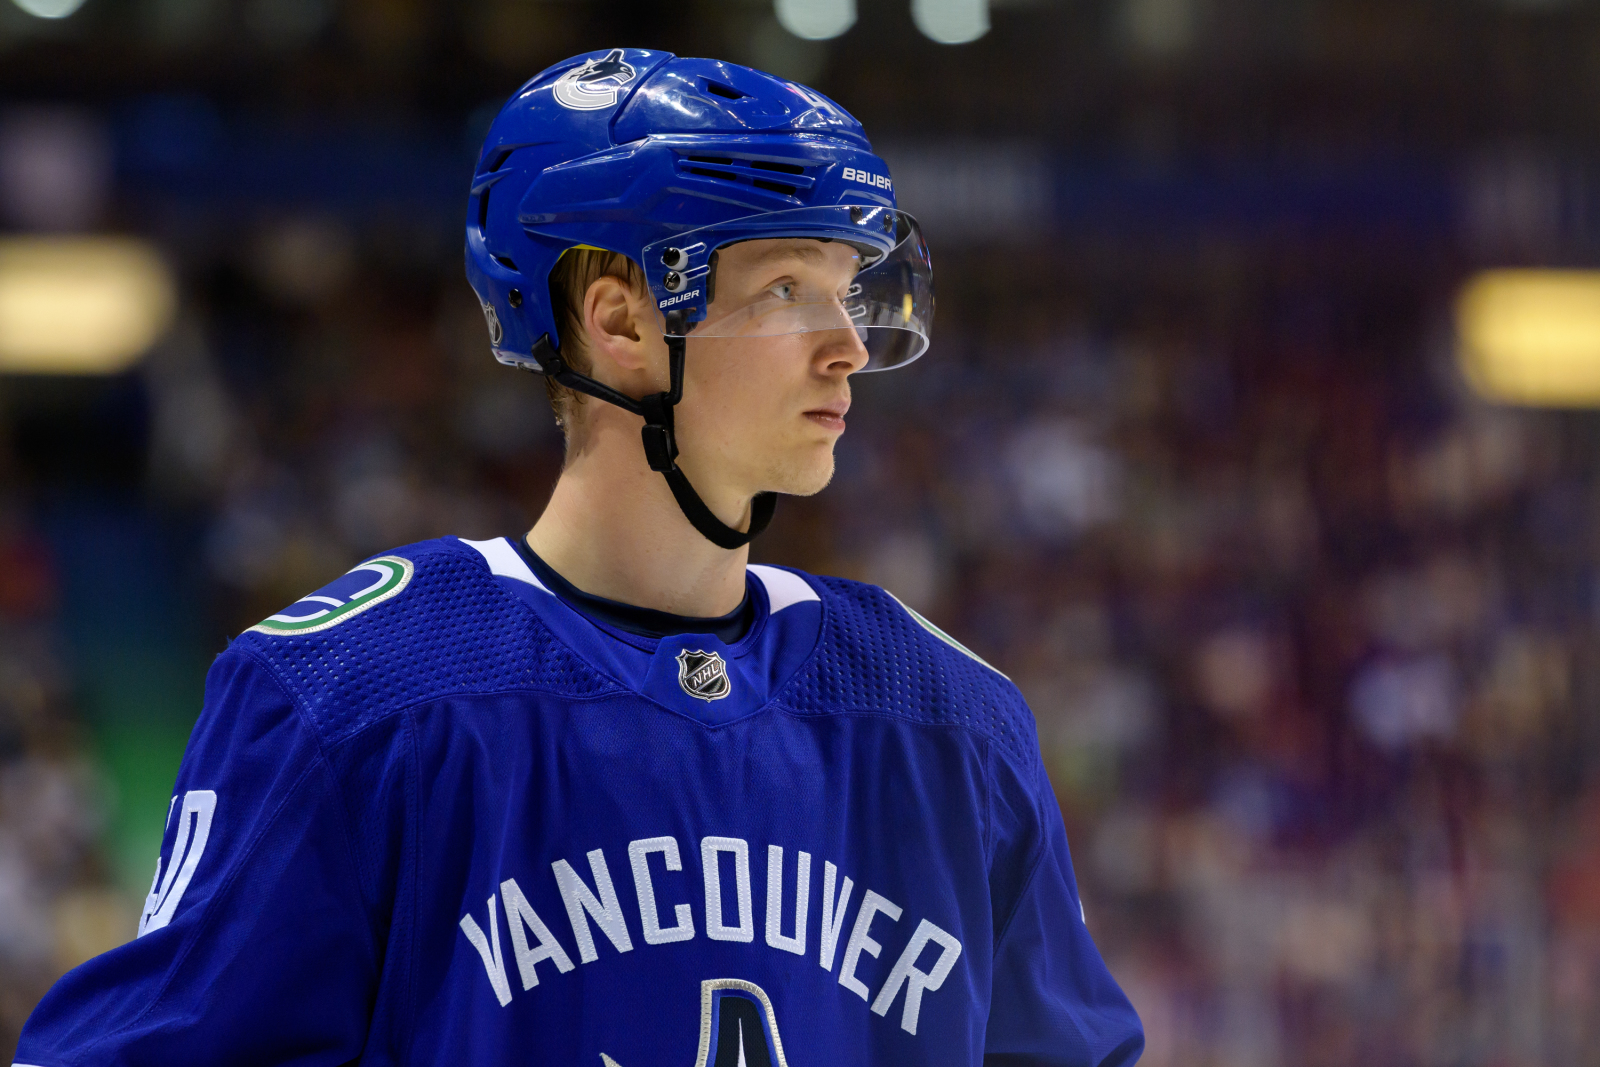 Vancouver Canucks: Elias Pettersson is the new face of the franchise